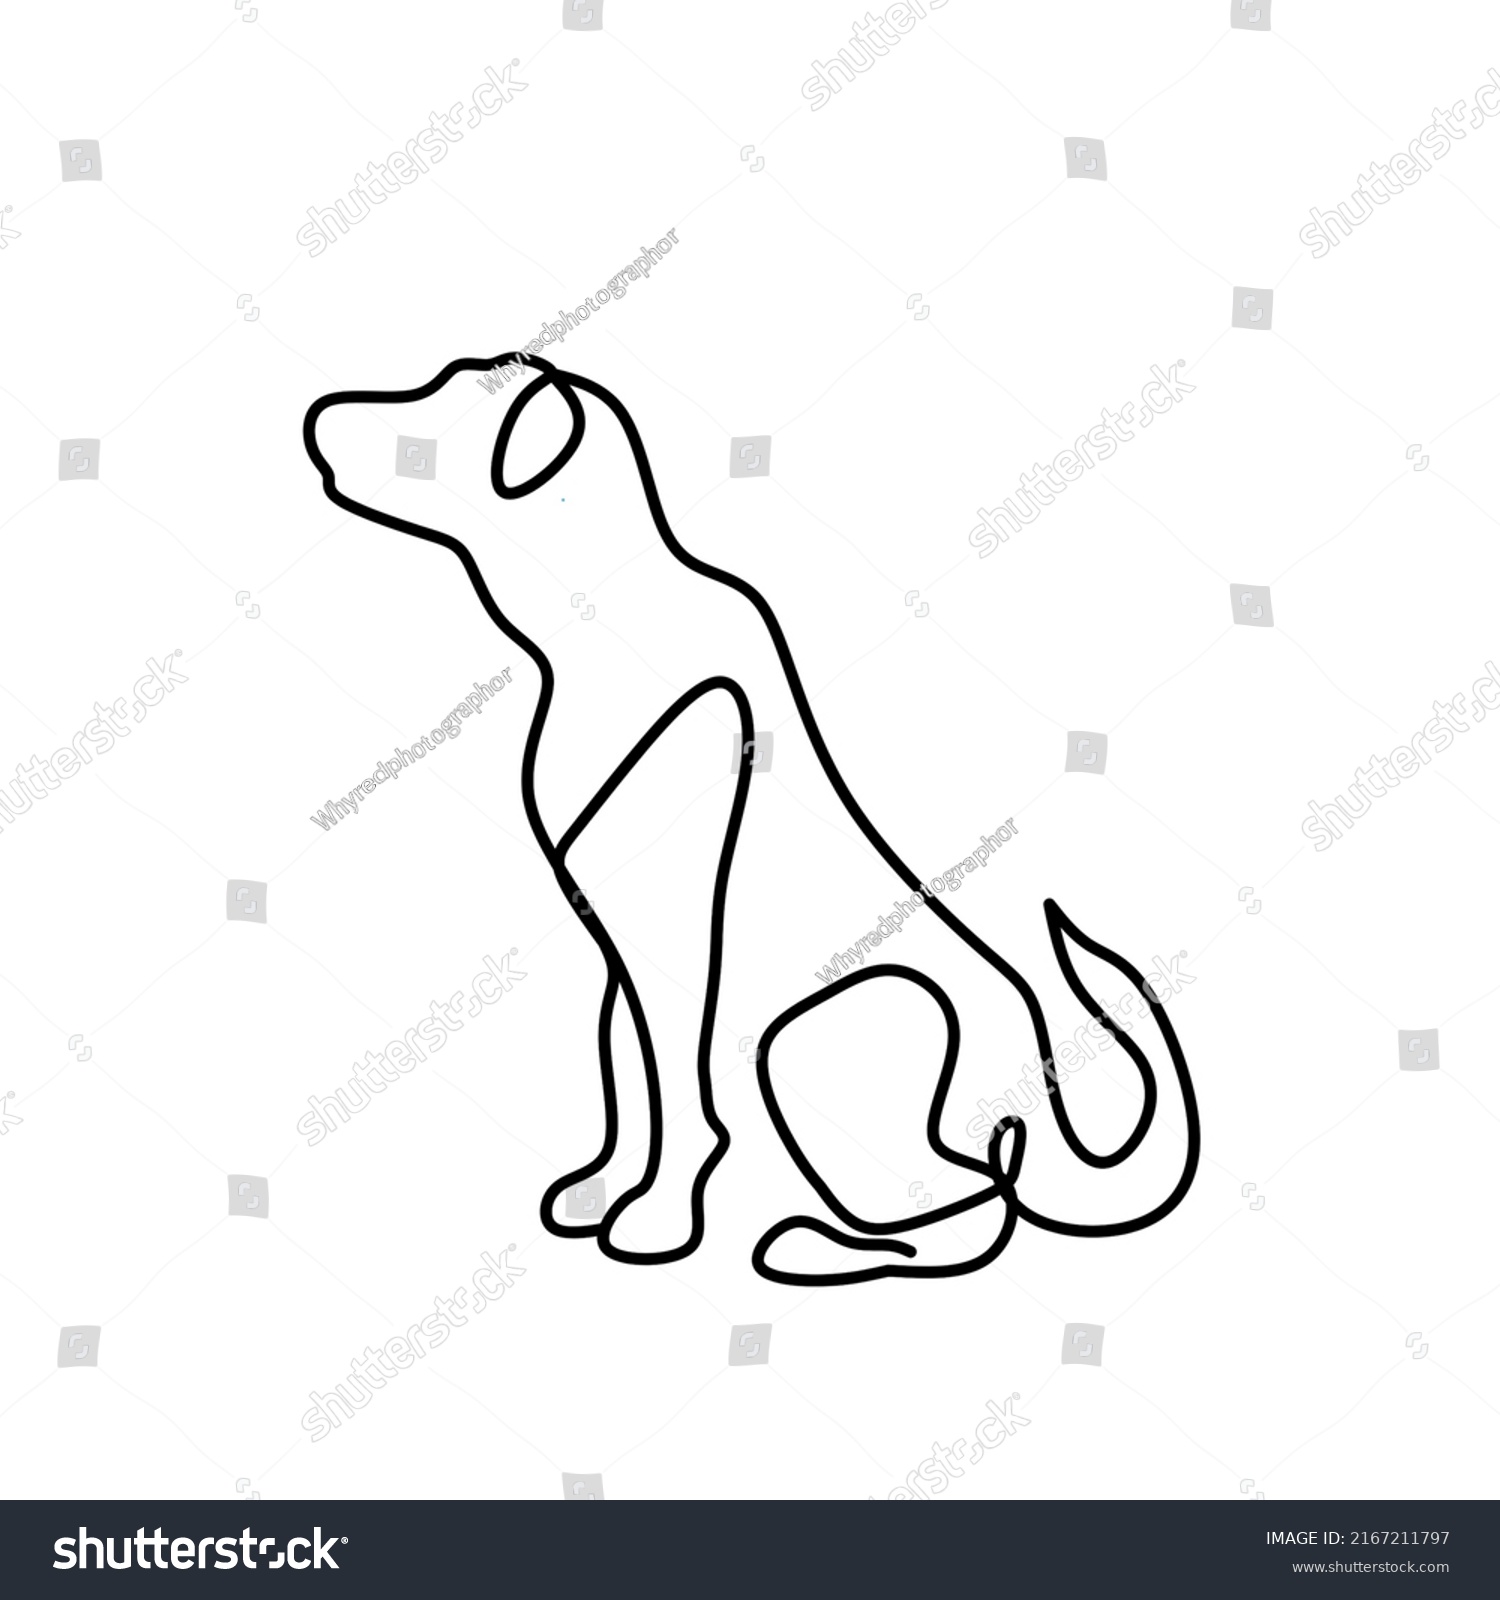 395 Charlie dog Images, Stock Photos & Vectors | Shutterstock